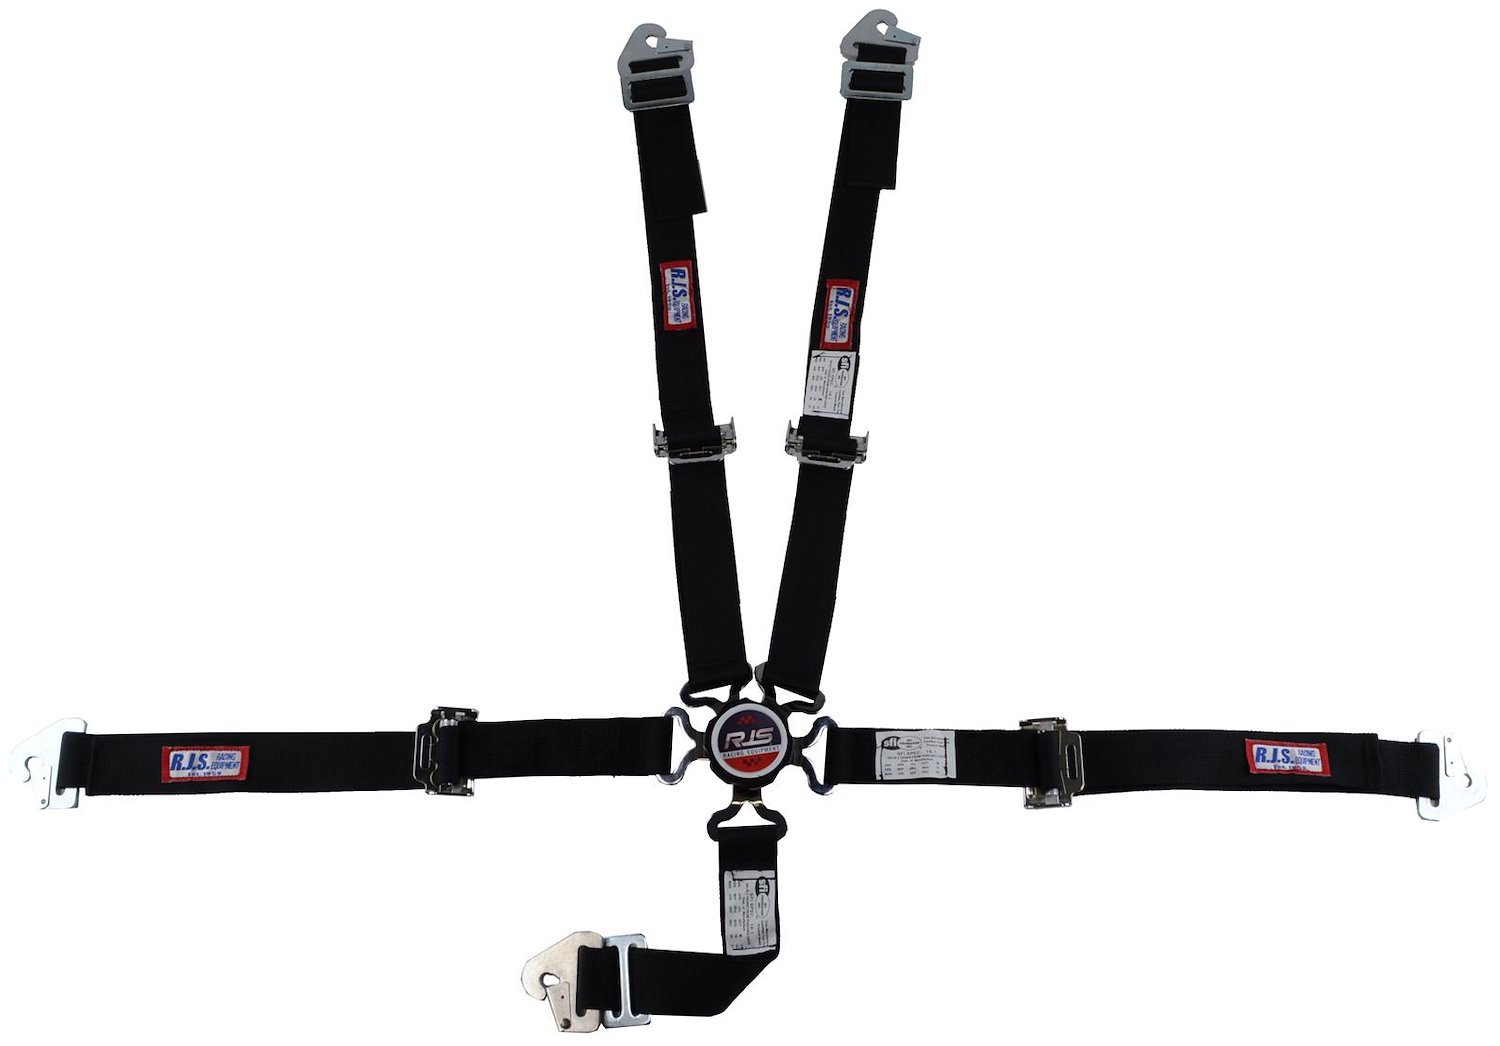 SFI 16.1 CAM-LOCK HARNESS 2 PULL DOWN Lap Belt 2 Shoulder Harness Individual FLOOR Mount 2 DOUBLESub ALL WRAP/BOLT ENDS HOT PINK